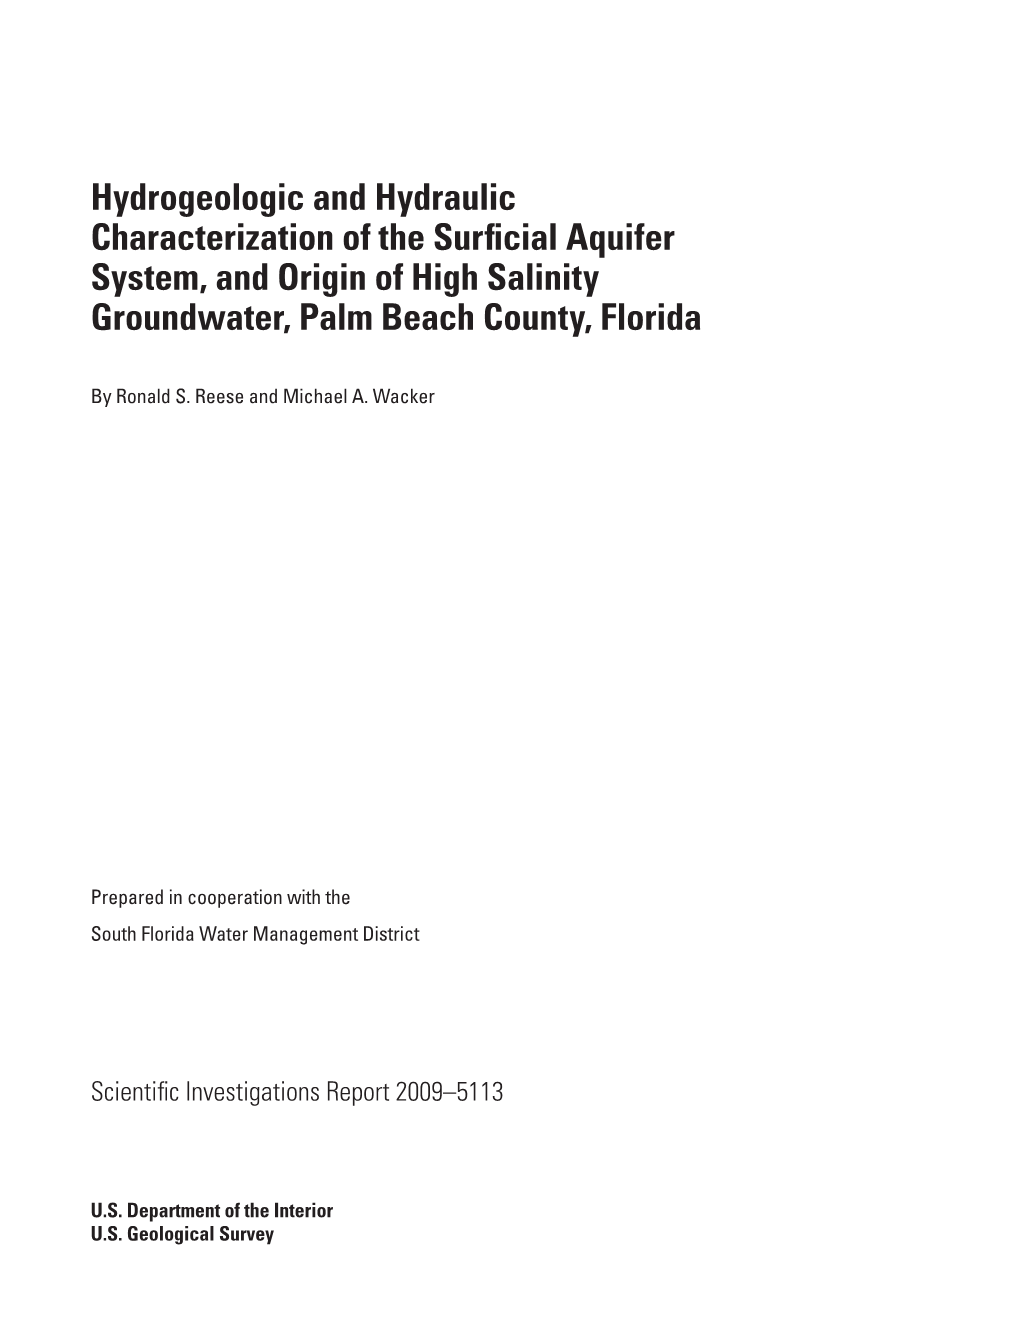 Hydrogeologic and Hydraulic Characterization of the Surficial Aquifer System, and Origin of High Salinity Groundwater, Palm Beach County, Florida